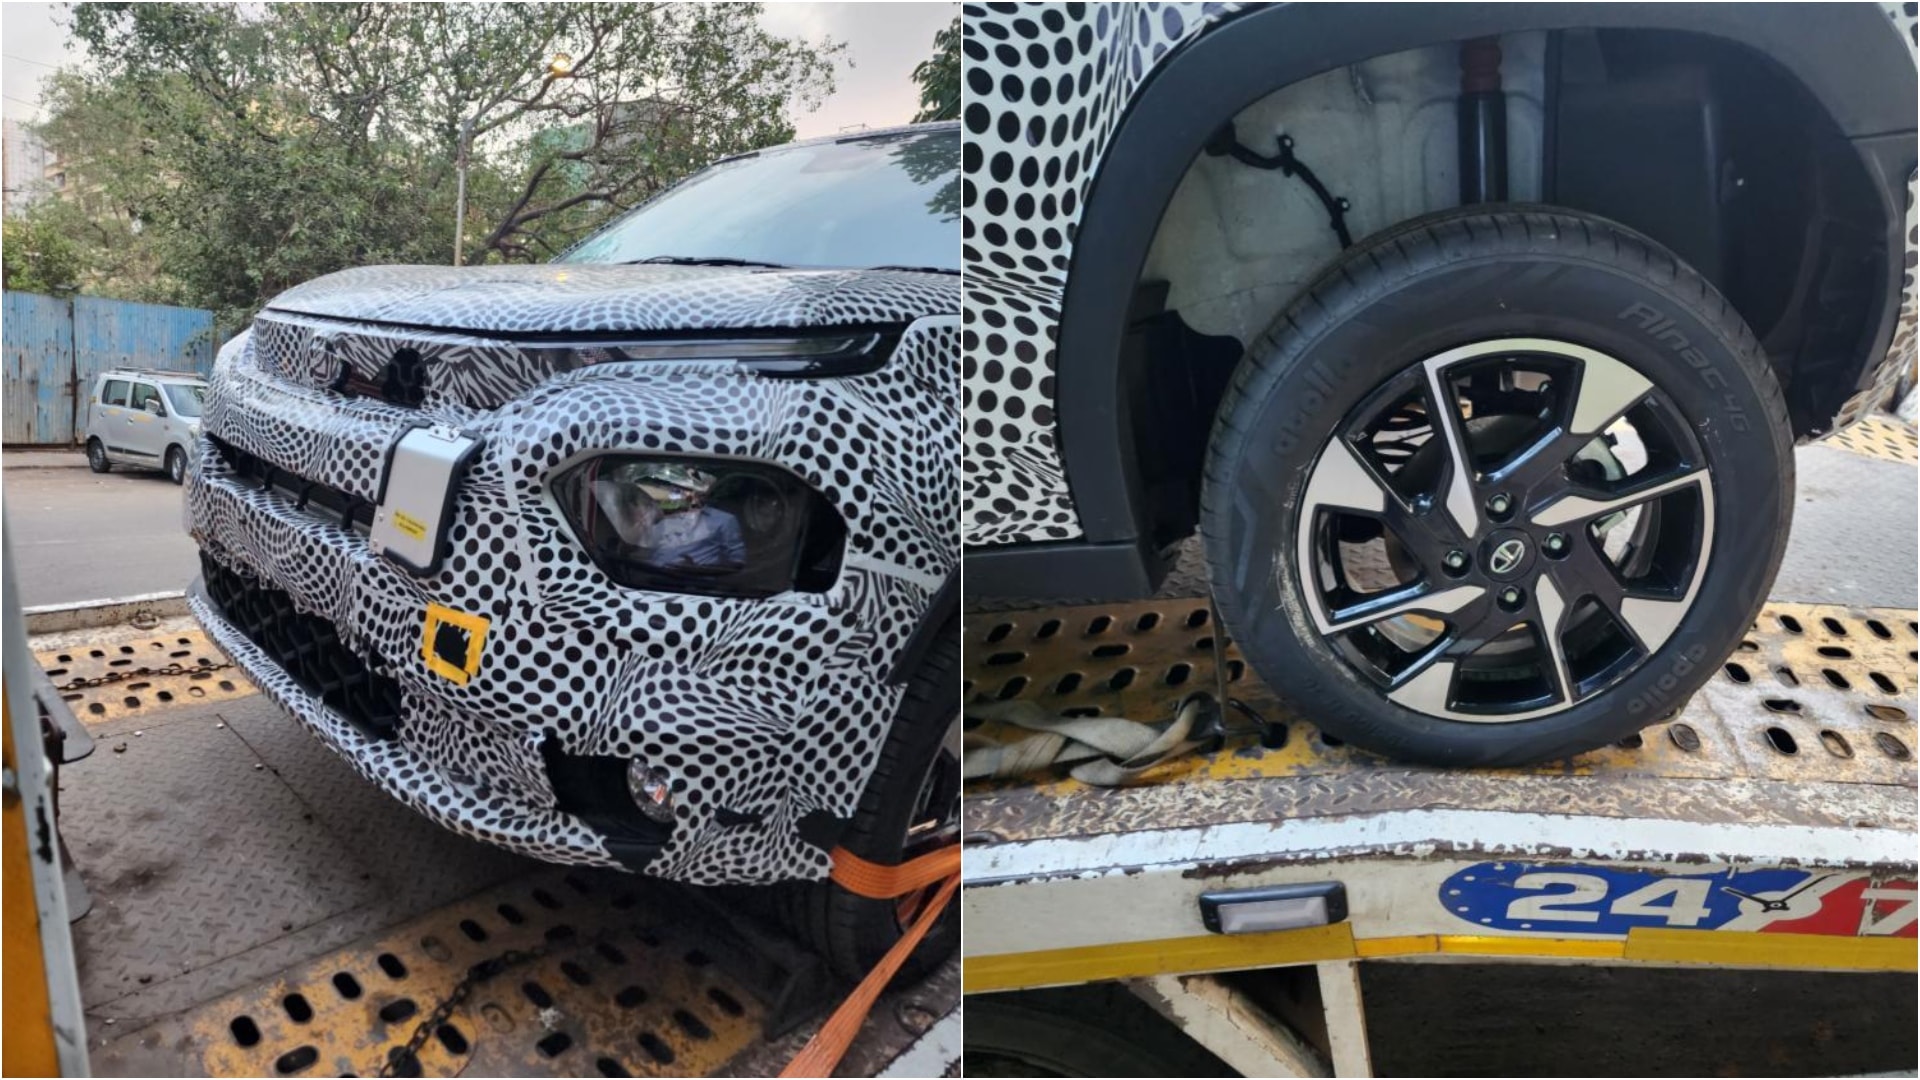 The test mule has a rear disc brake, something the petrol version of the Tata Punch subcompact SUV doesn't offer